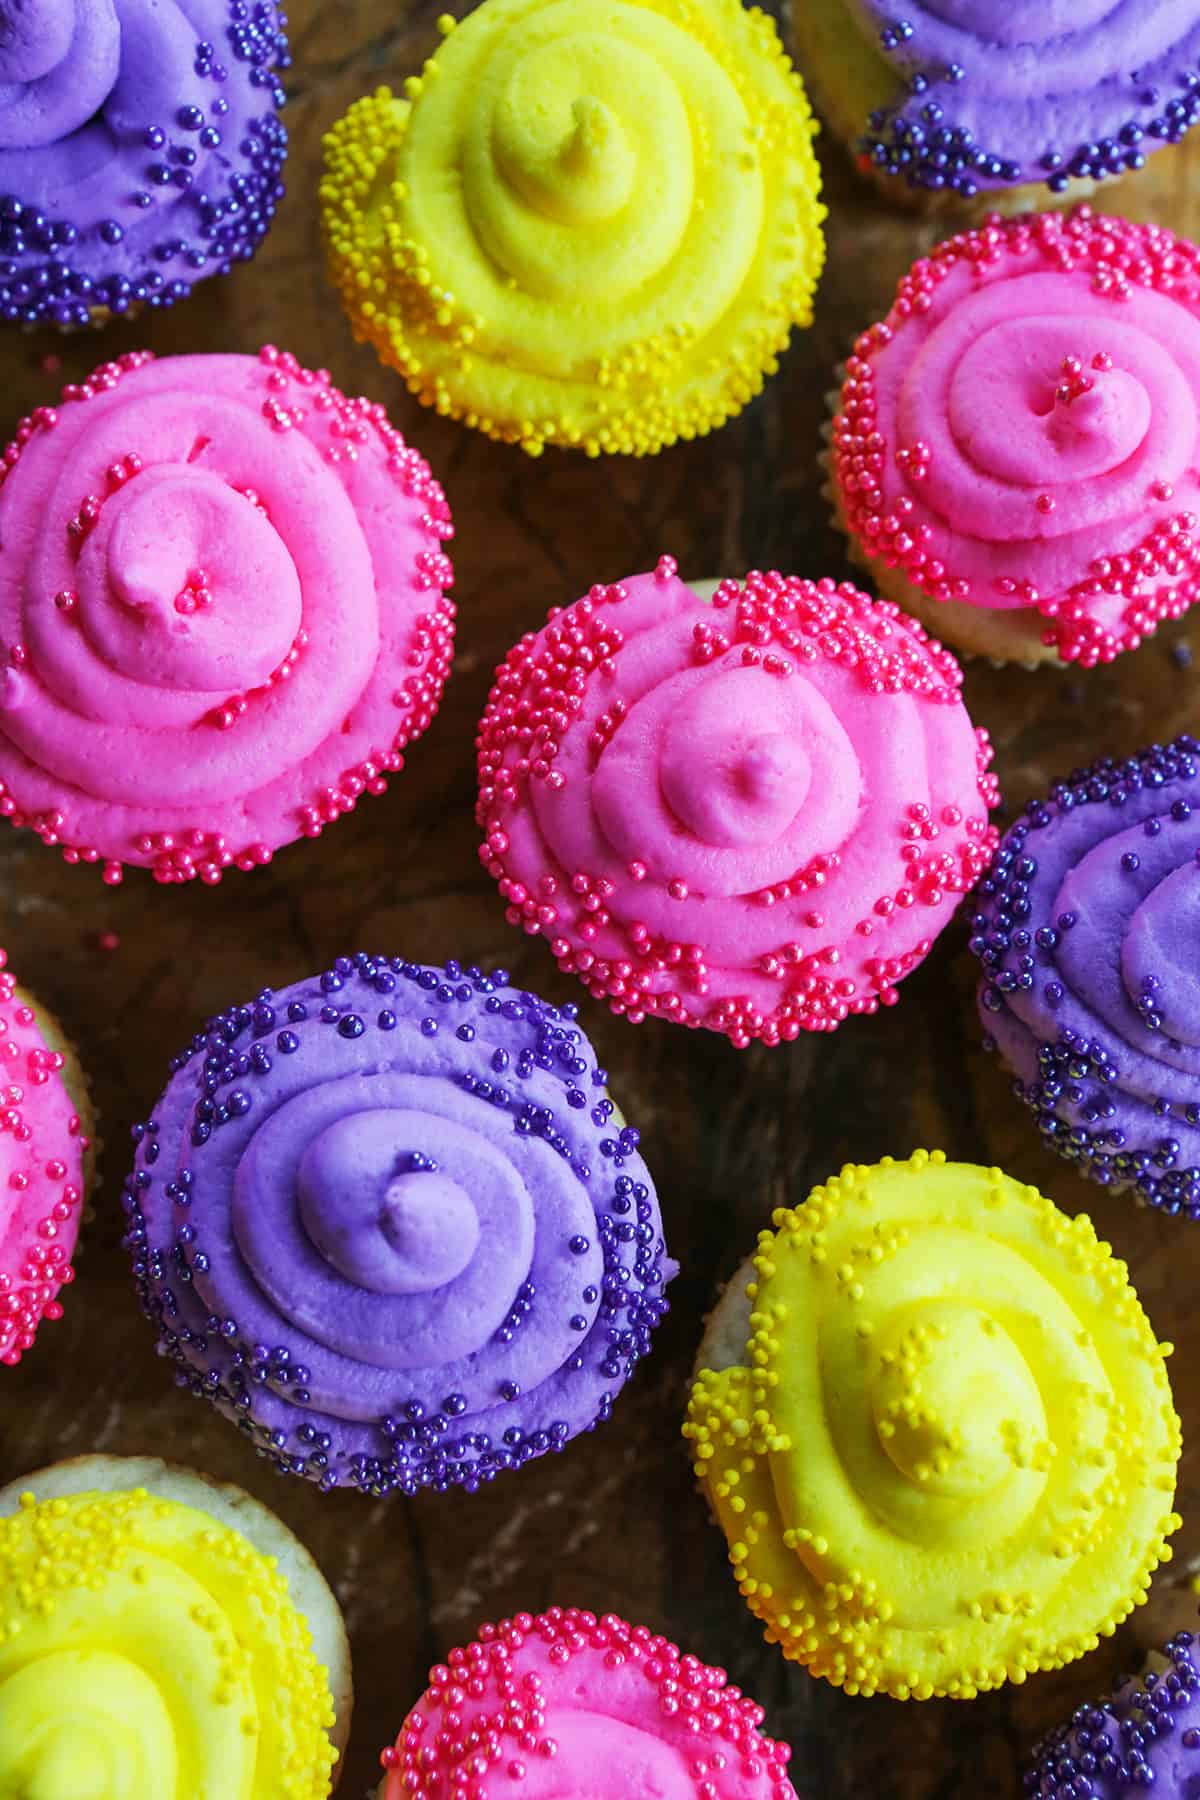 Top view of colorfully decorated cupcakes.